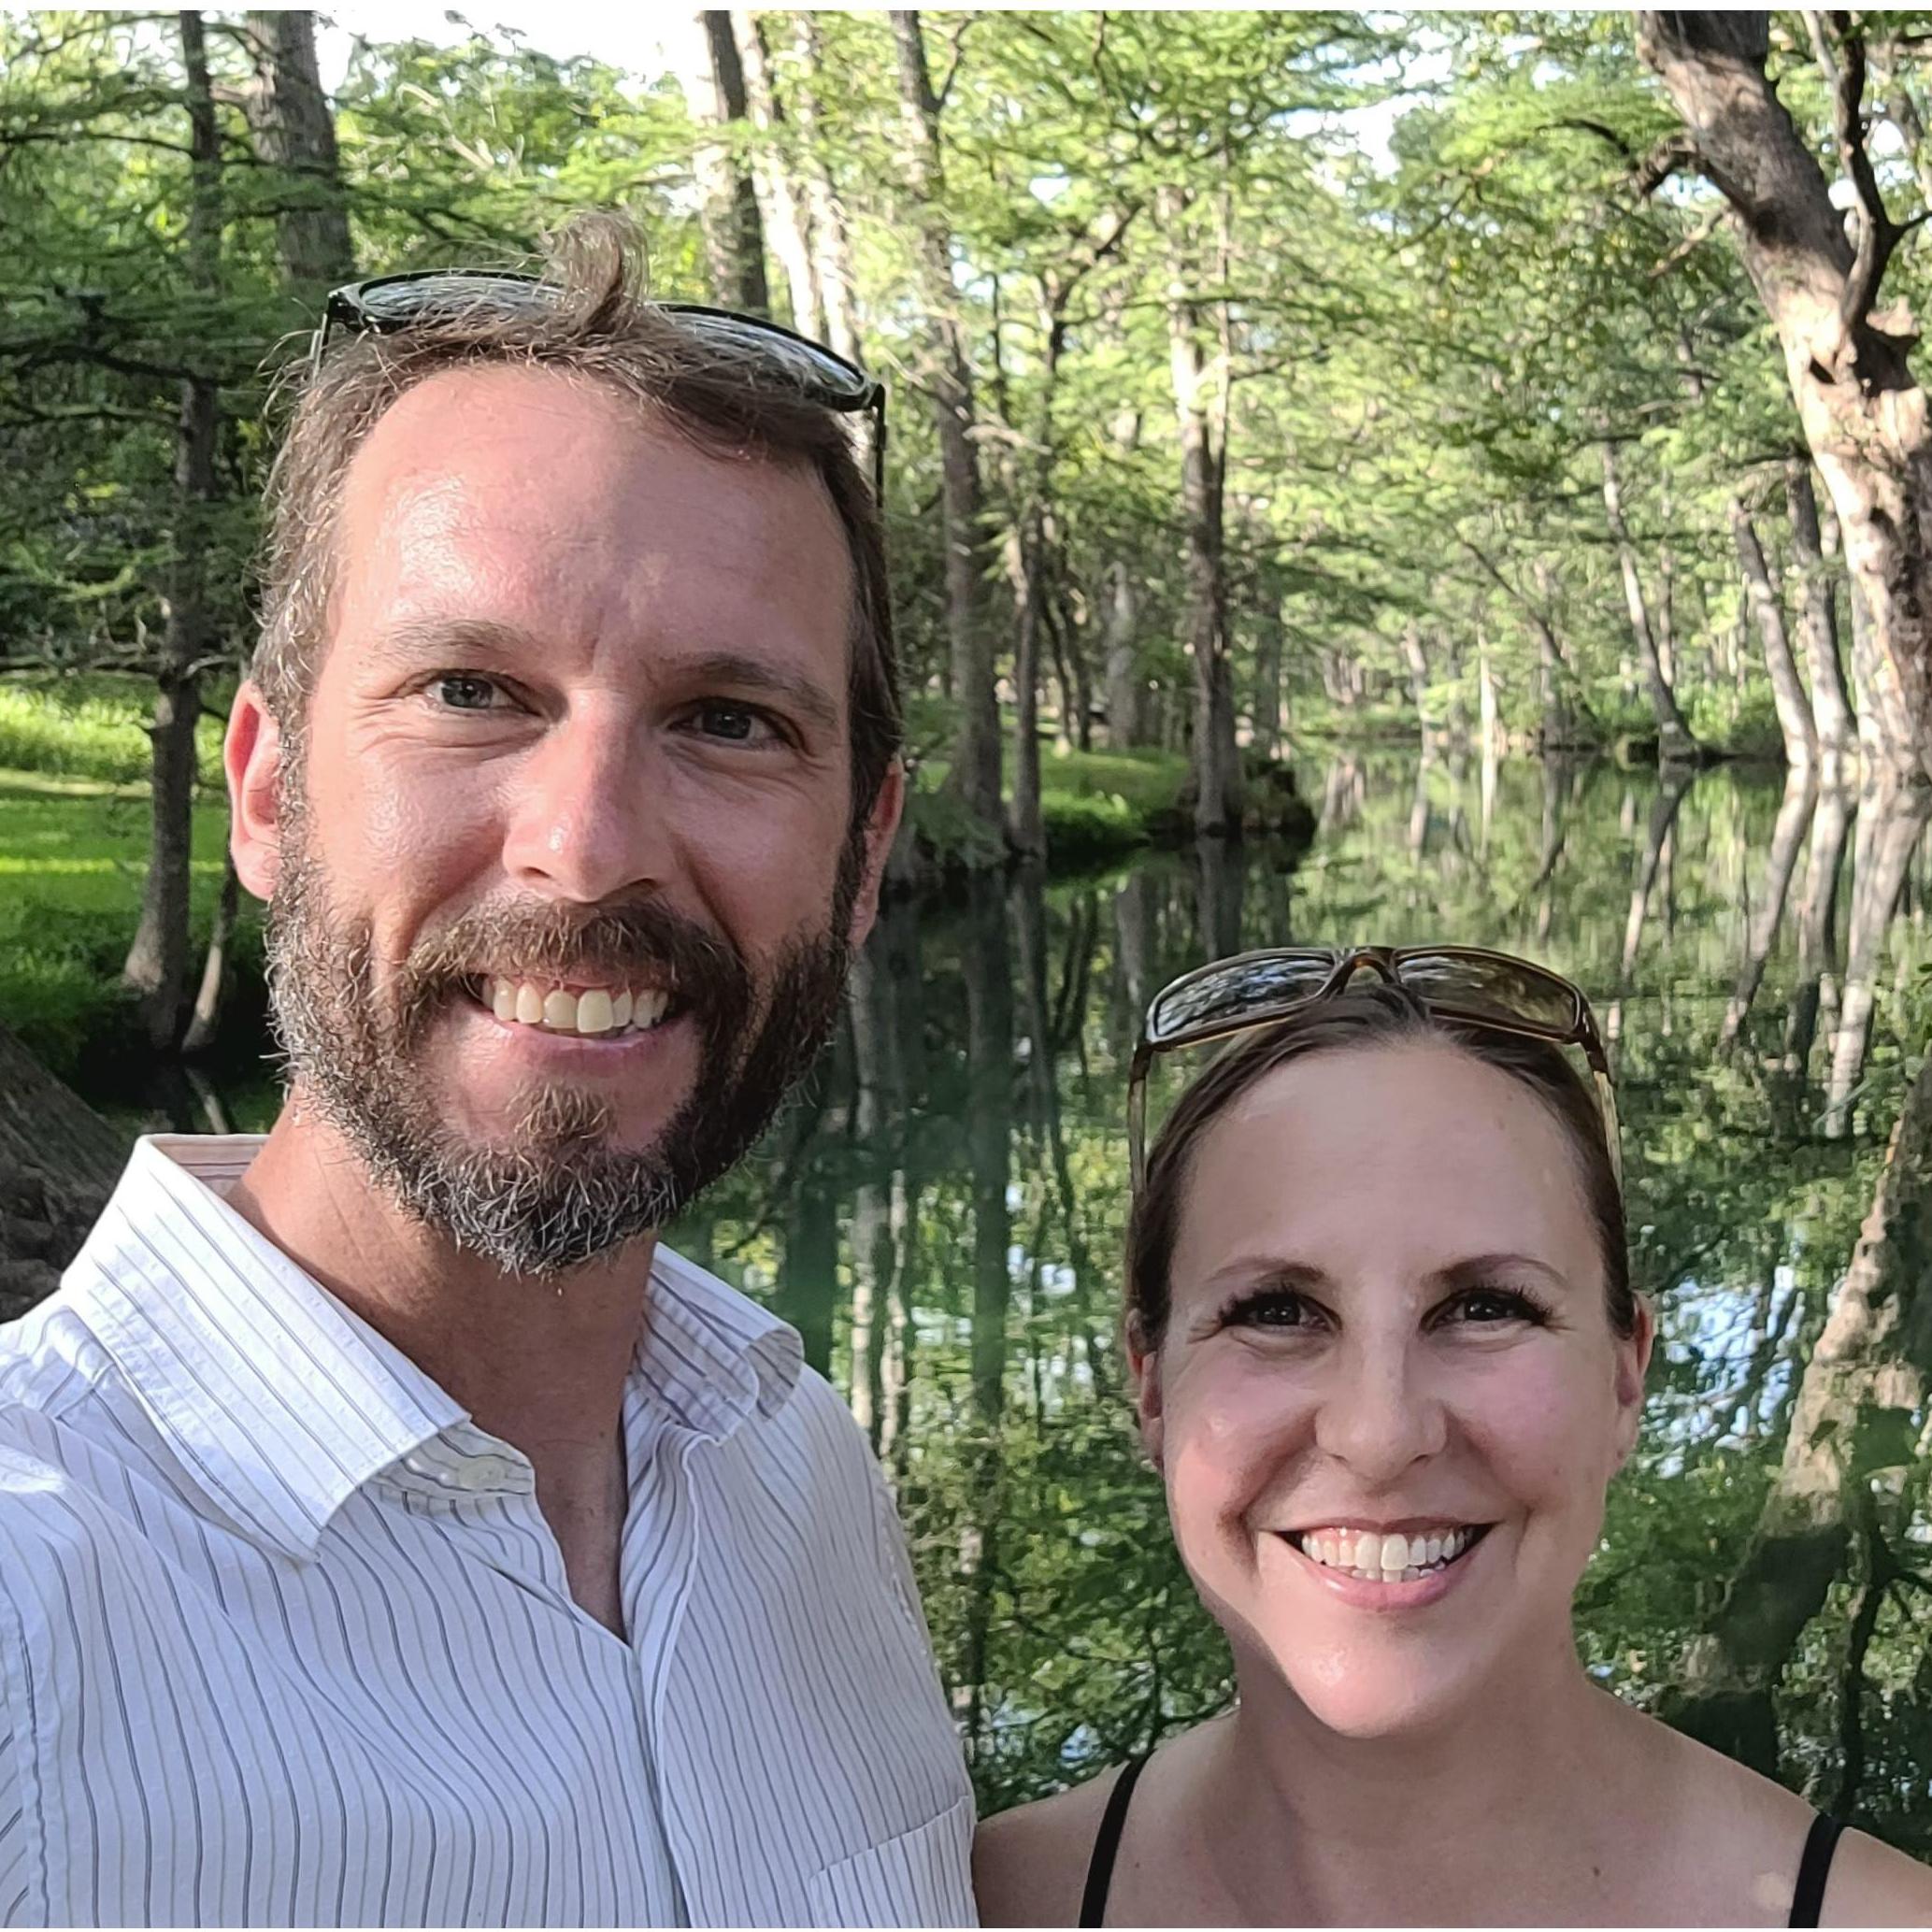 Date night at Blue Hole in Wimberley TX